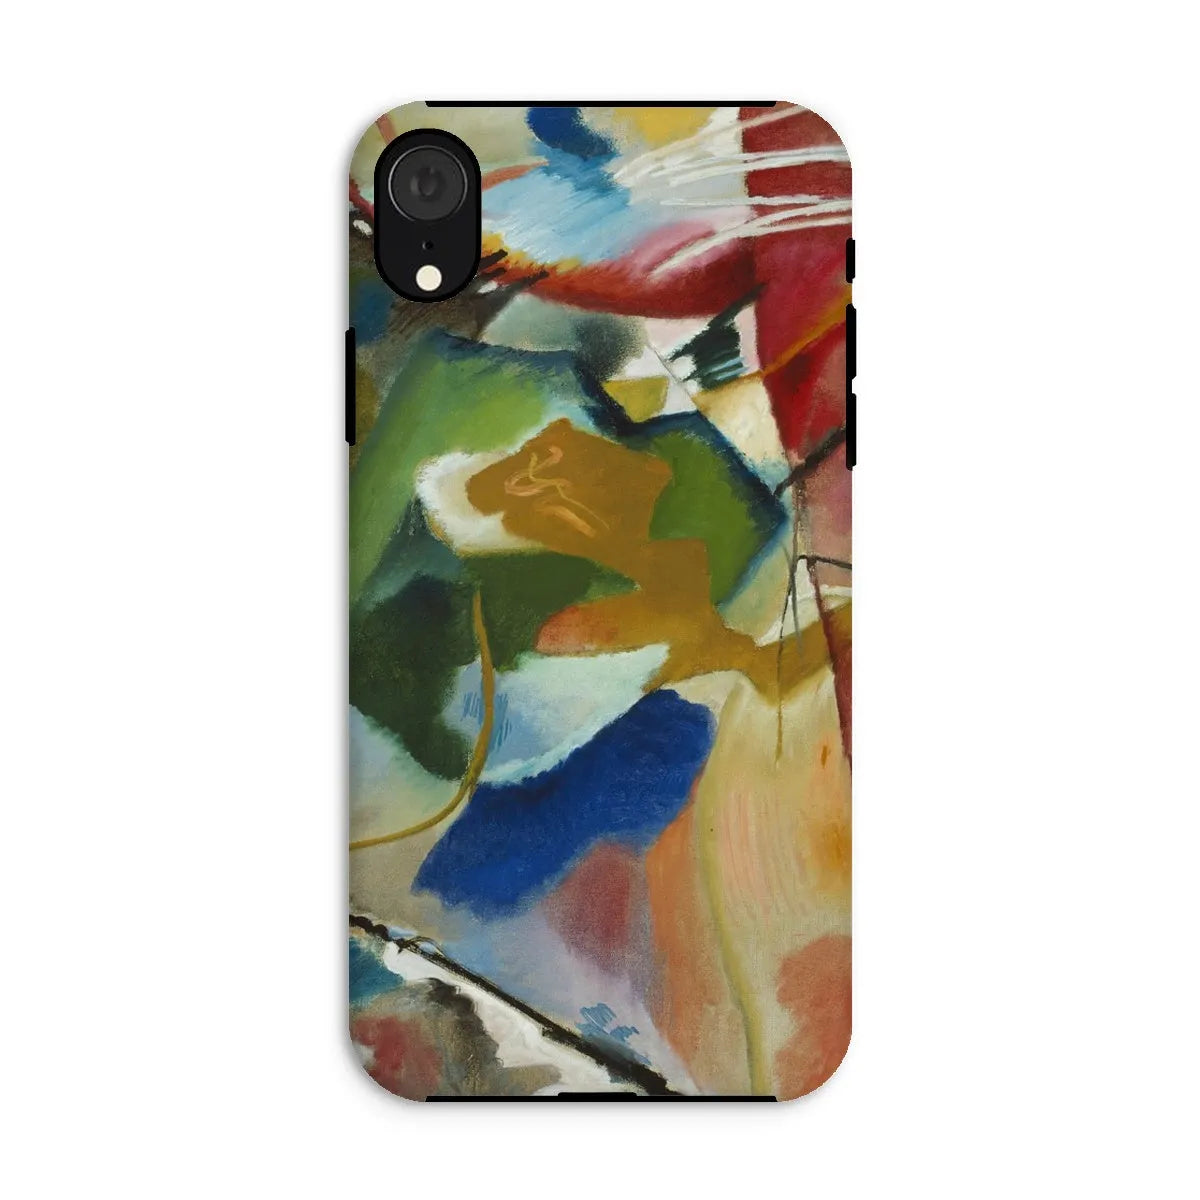 Painting With Green Center Art Phone Case - Wassily Kandinsky - Iphone Xr / Matte - Mobile Phone Cases - Aesthetic Art